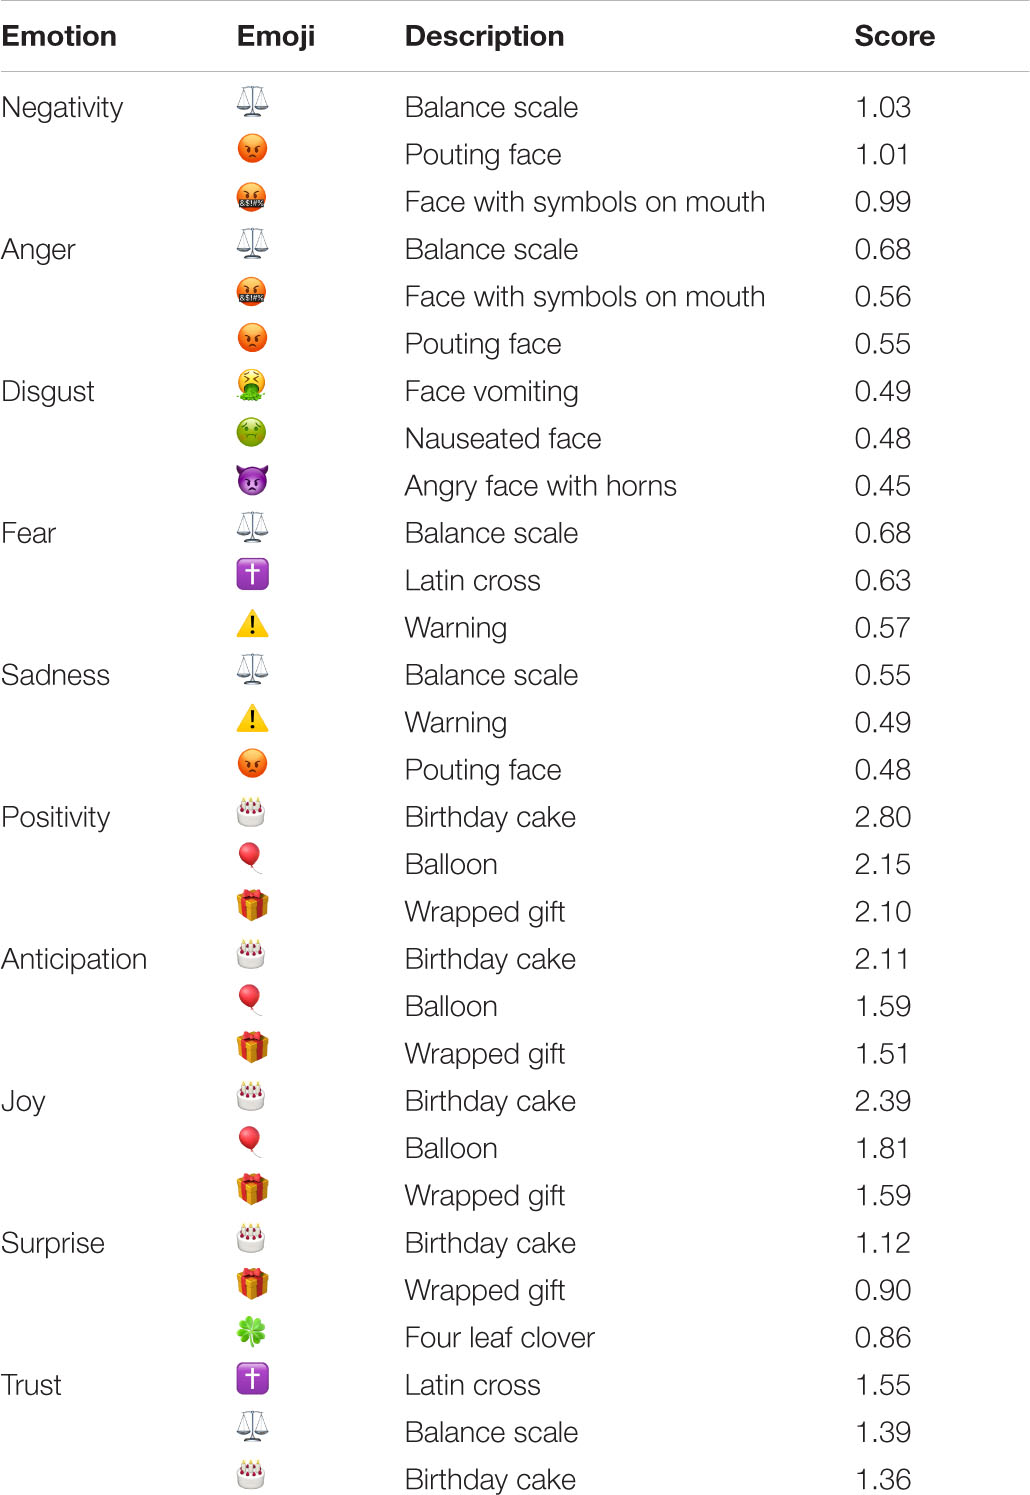 What is the full list of emoticons?